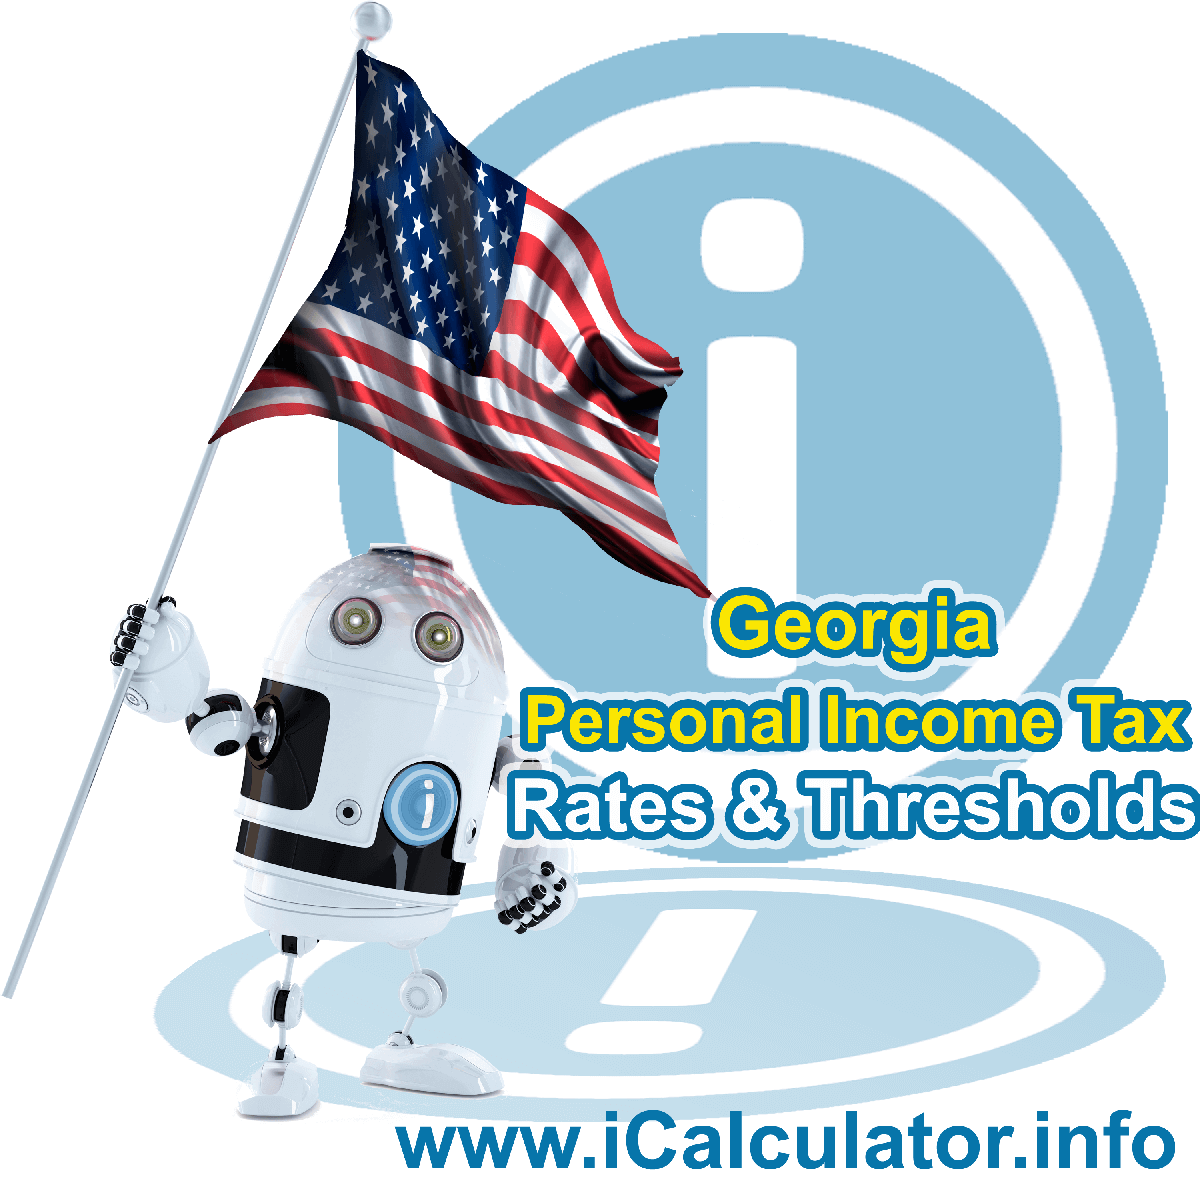 Georgia State Tax Tables 2015. This image displays details of the Georgia State Tax Tables for the 2015 tax return year which is provided in support of the 2015 US Tax Calculator